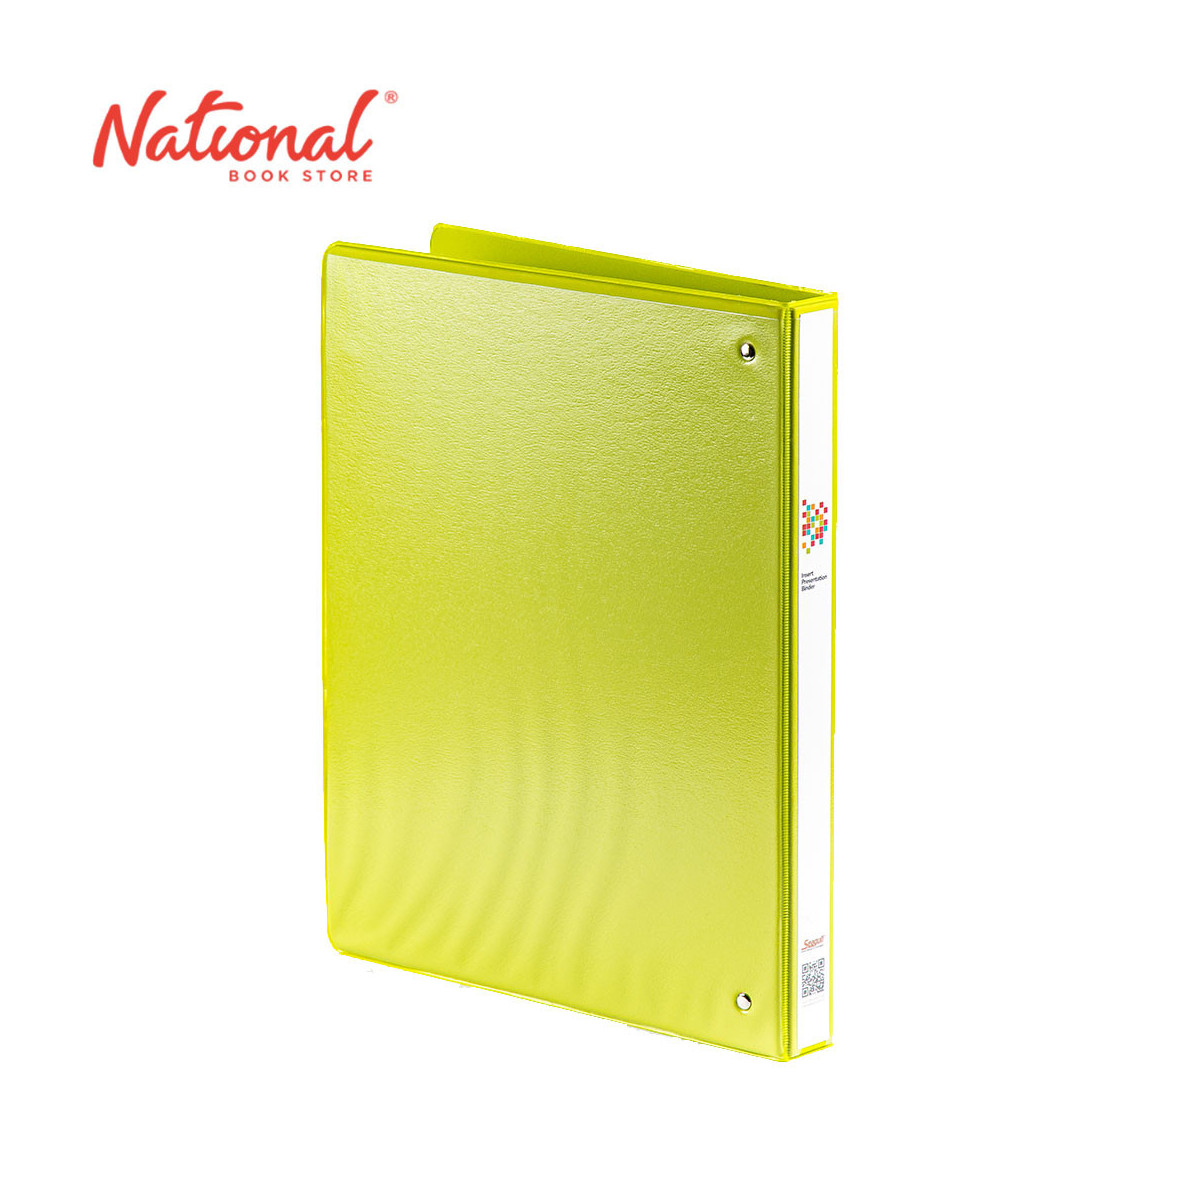 Seagull Ring Binder 3 Ring CVP5 A4 0.5 Inch D Type PVC Cover with Front & Back Outer Pockets Green